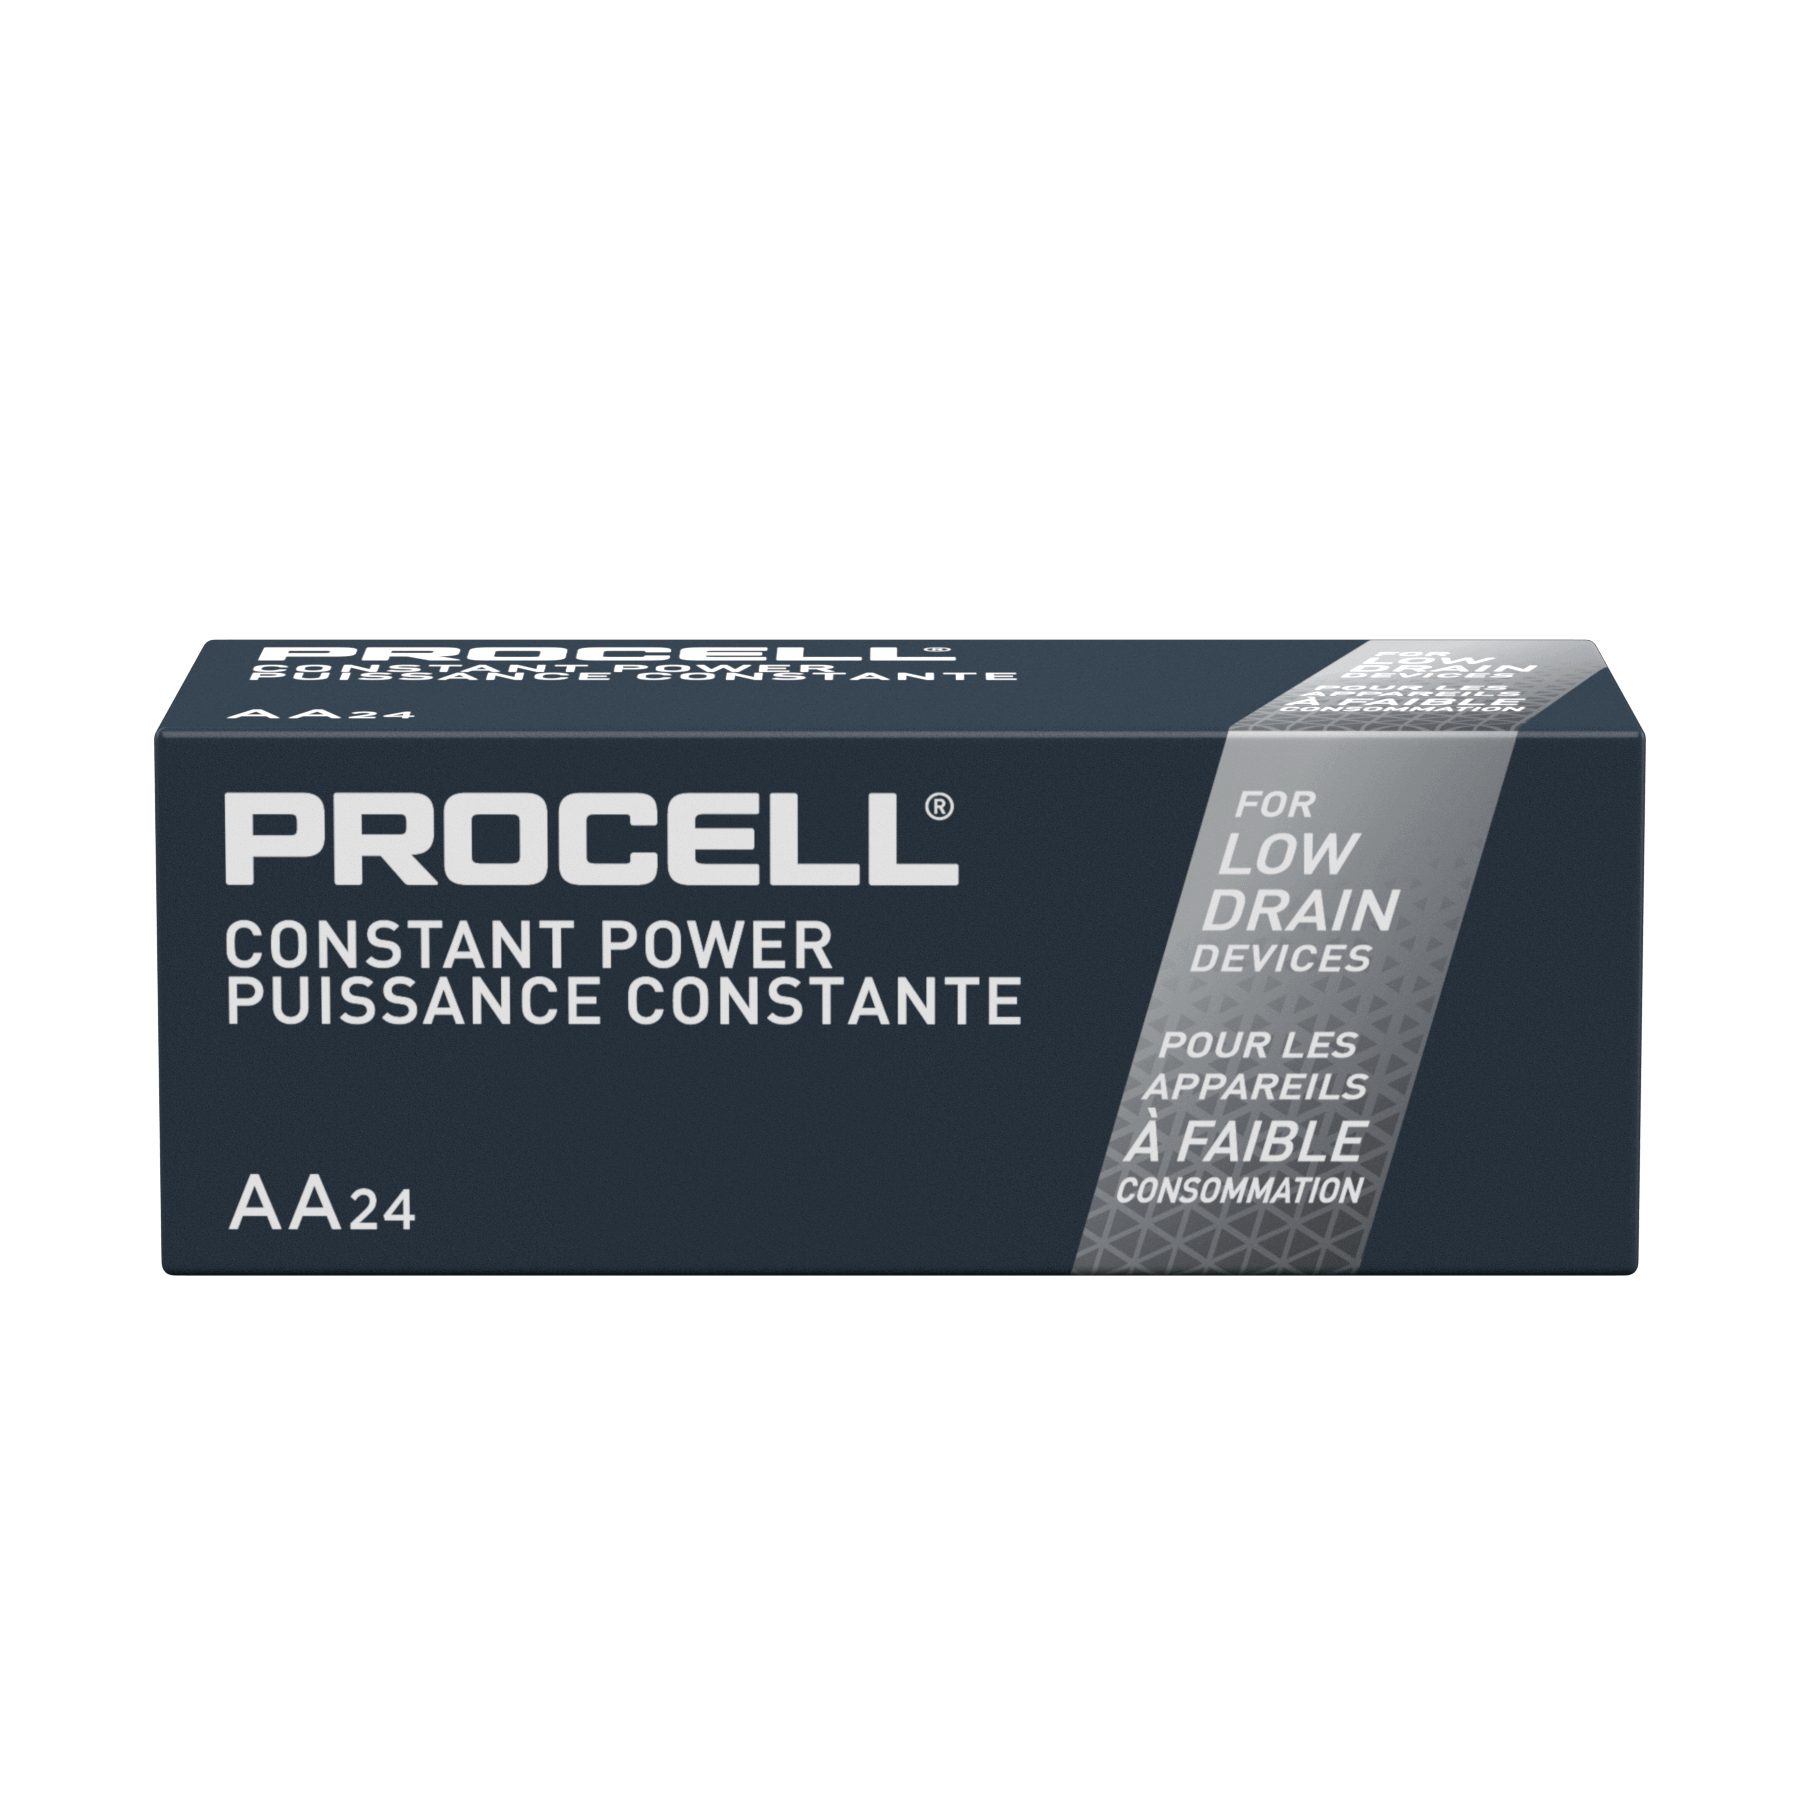 From-PSD-to-PNG-Alkaline_Packshots_NA_Procell_Constant_AA24_00041333520483_5011238_Front_View (1) (1) (1)